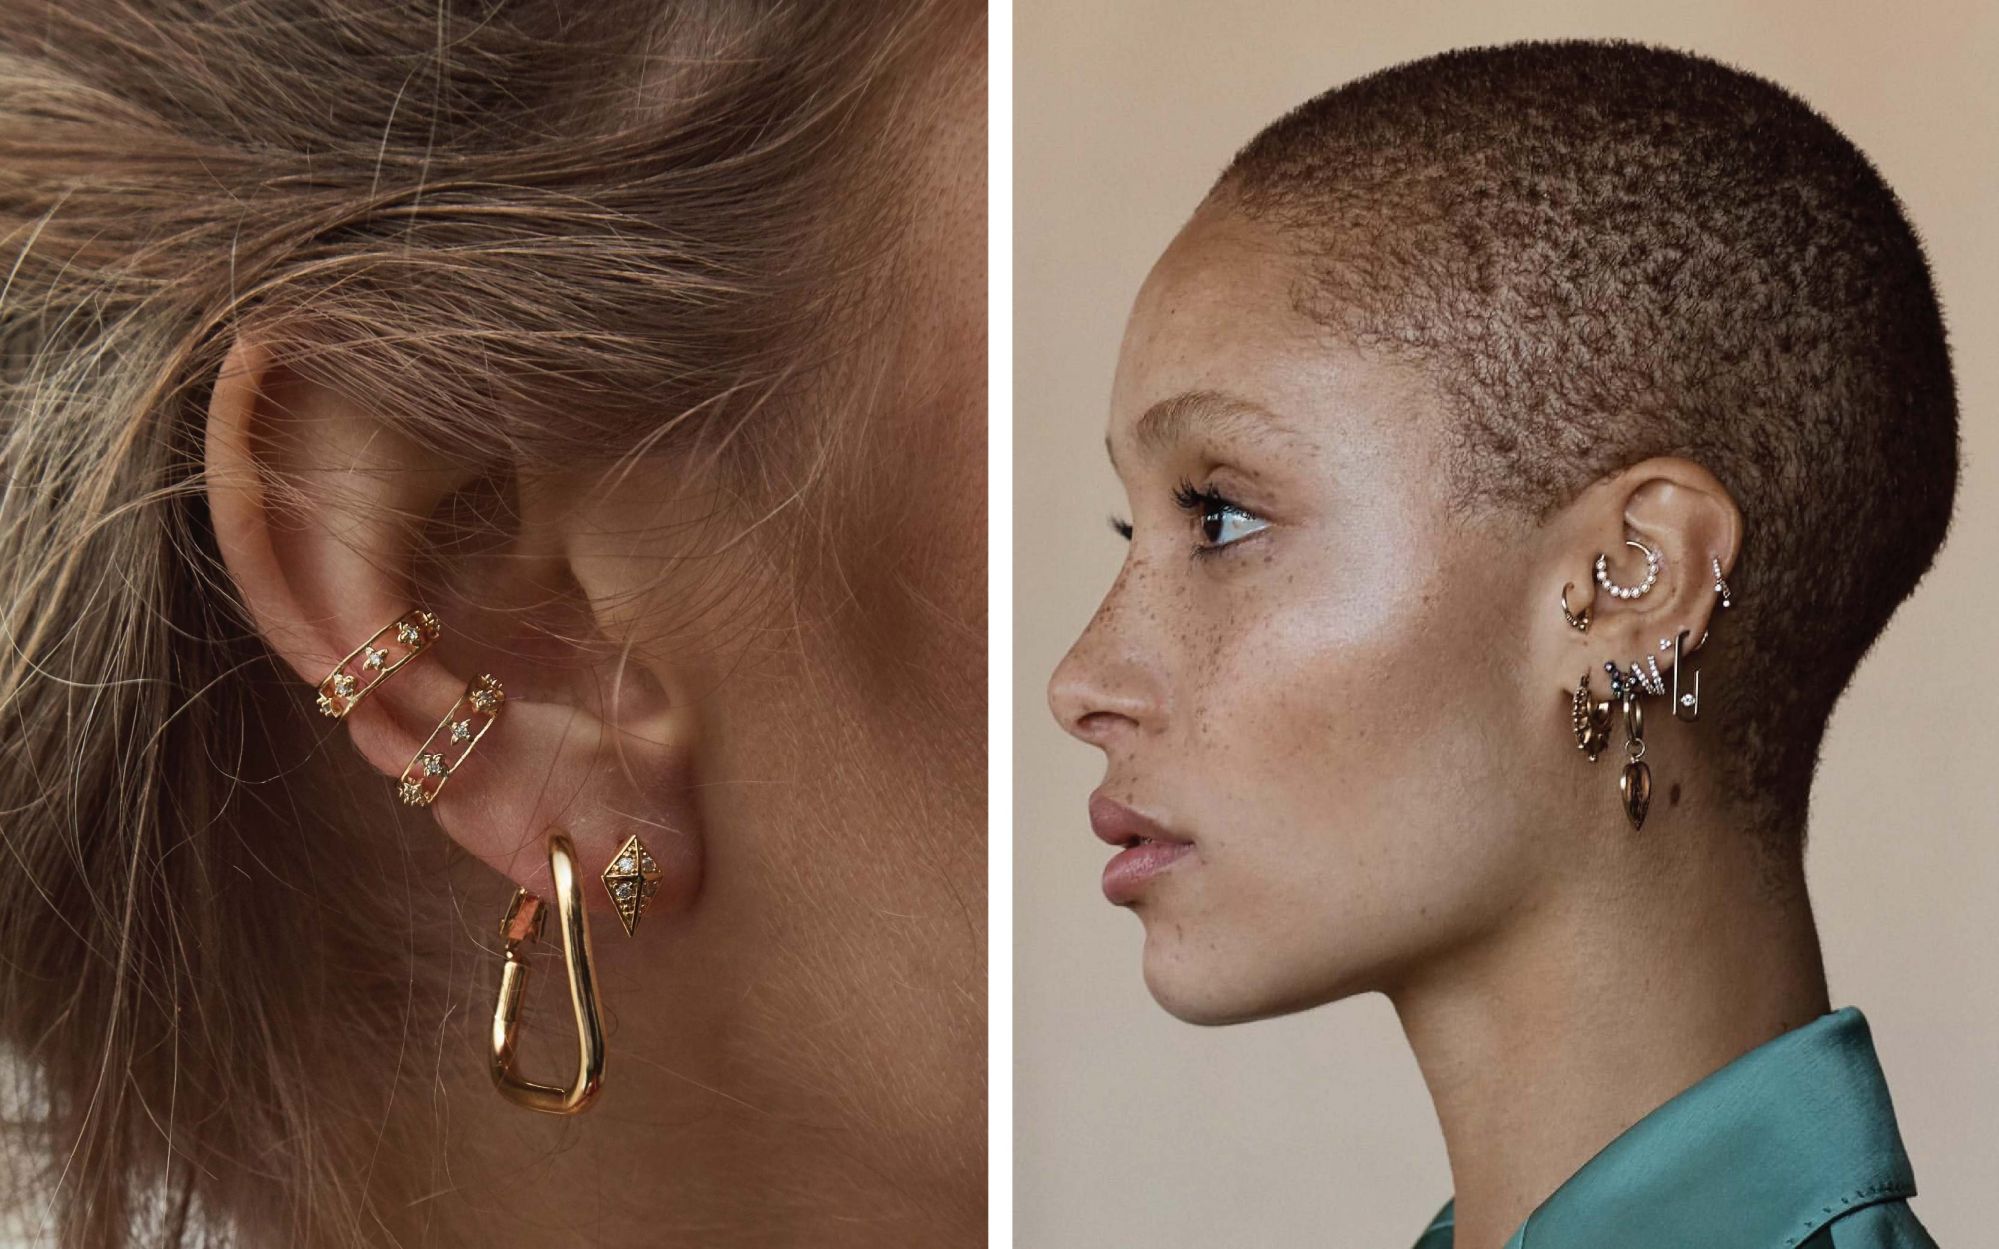 nss shopping guide: 10 ear piercings to buy right now